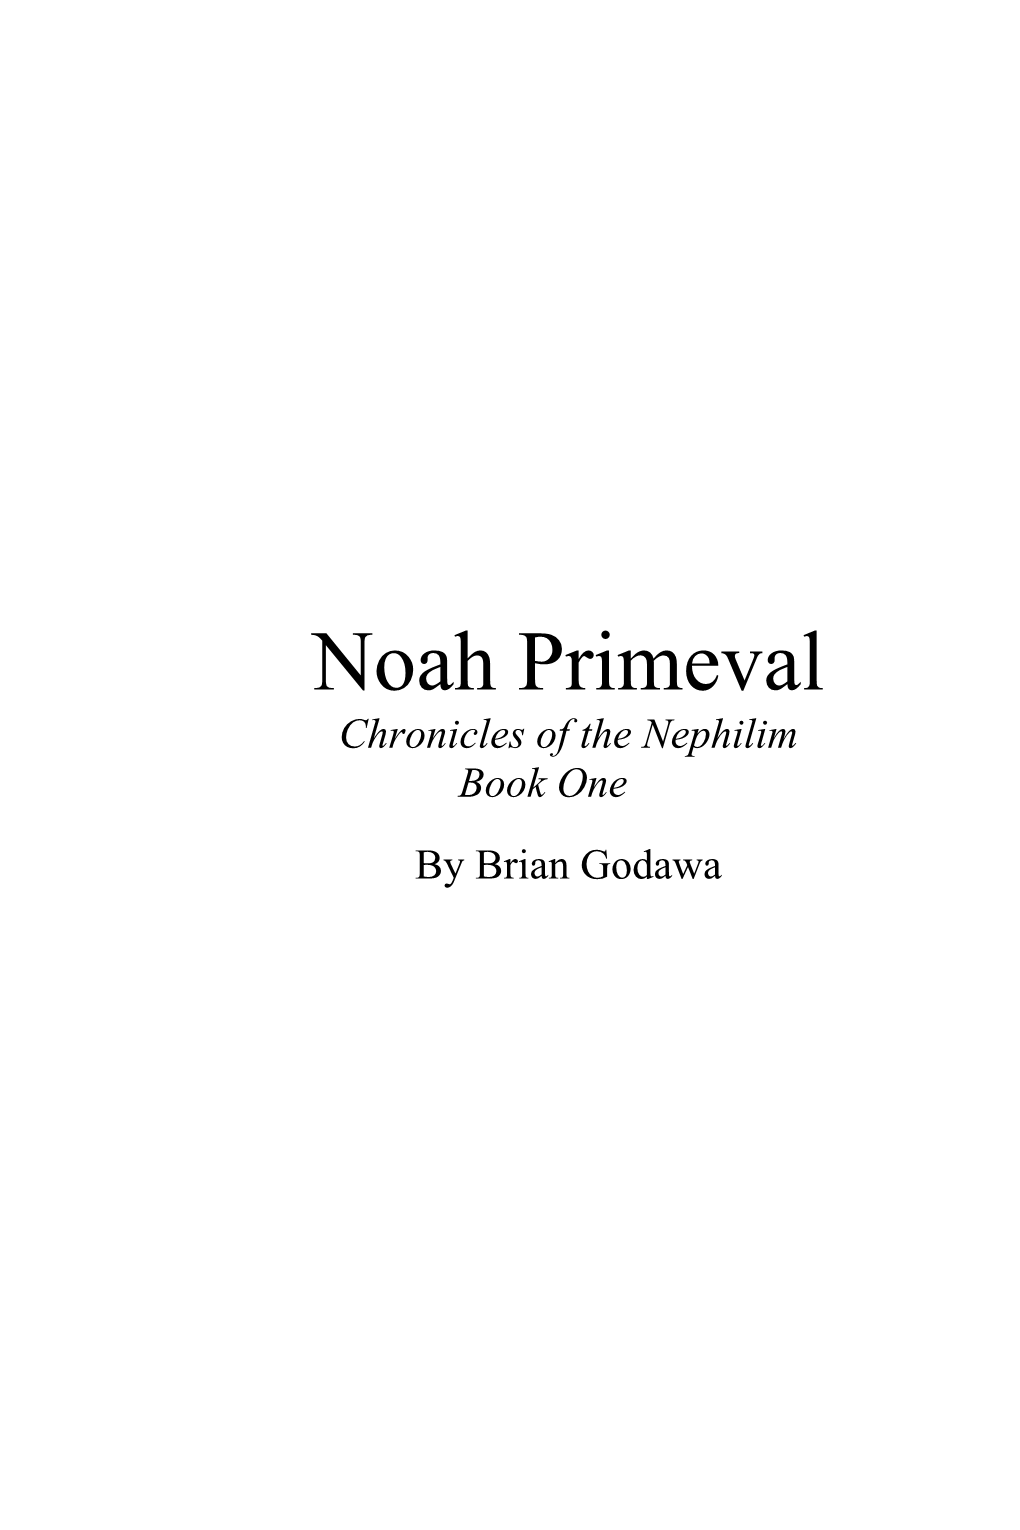 Noah Primeval Chronicles of the Nephilim Book One by Brian Godawa